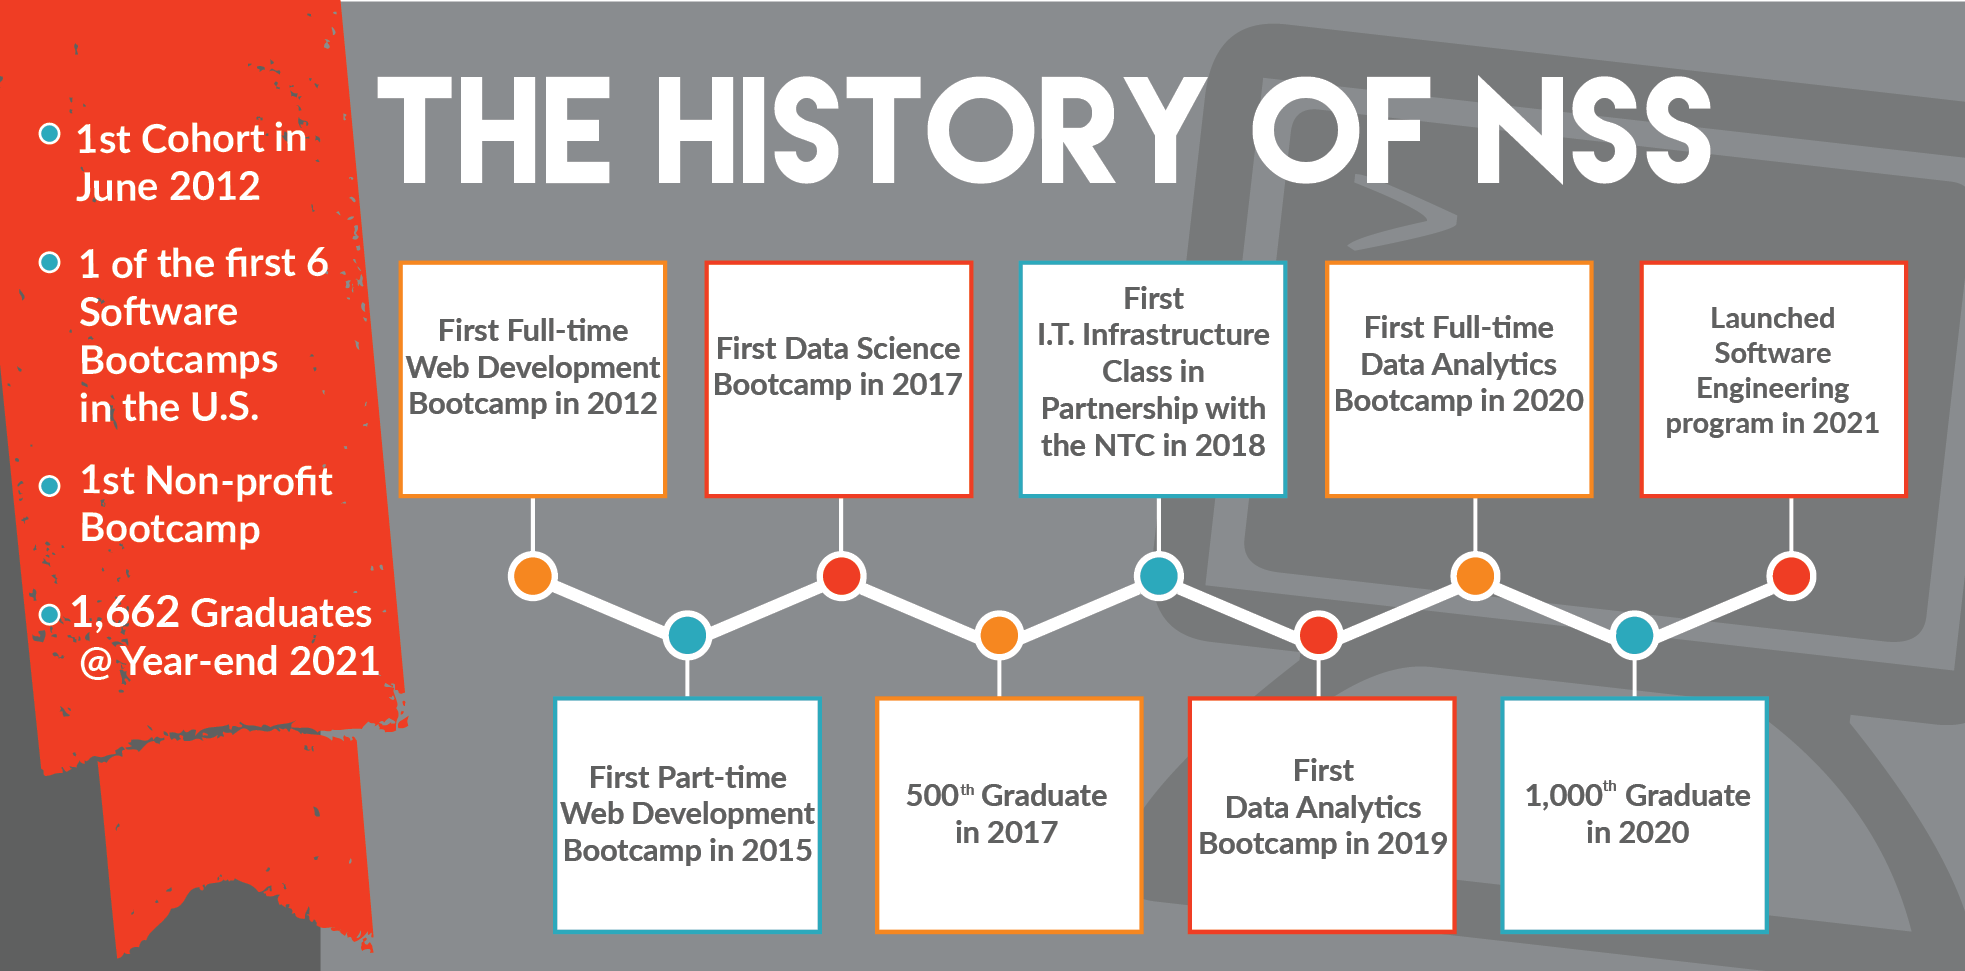 NSS_CommunityImpactReport2020-InfoGraphic-TheHistoryofNSS_V3 (1)